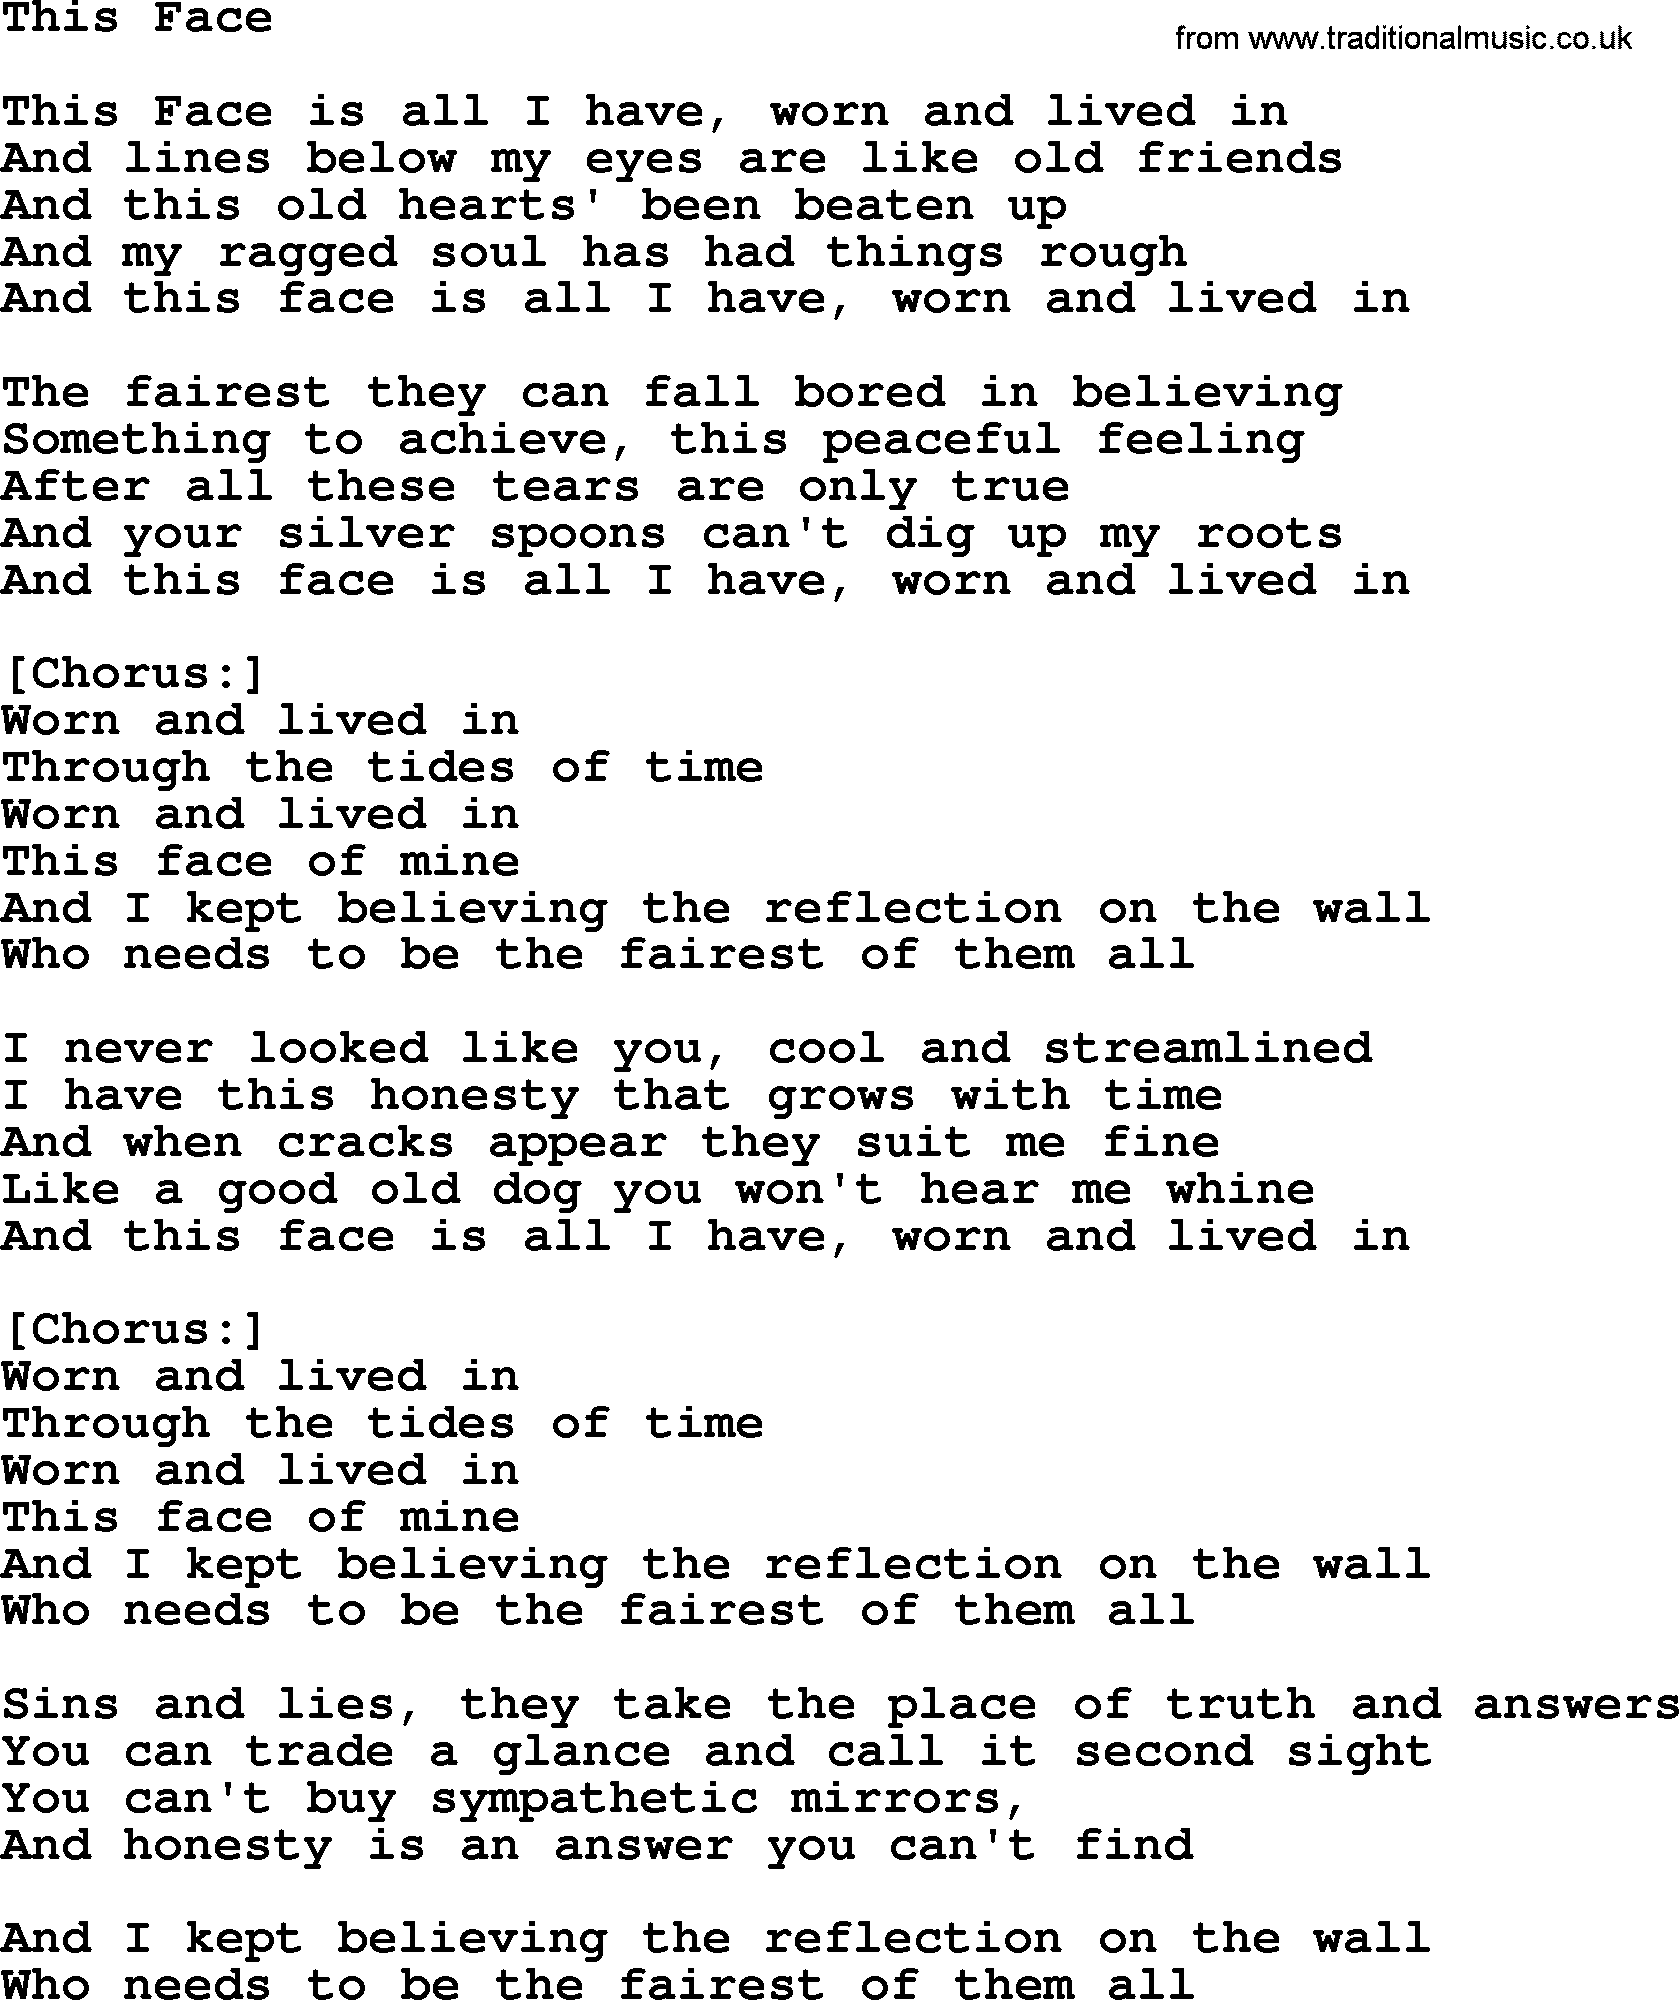 Willie Nelson song: This Face lyrics